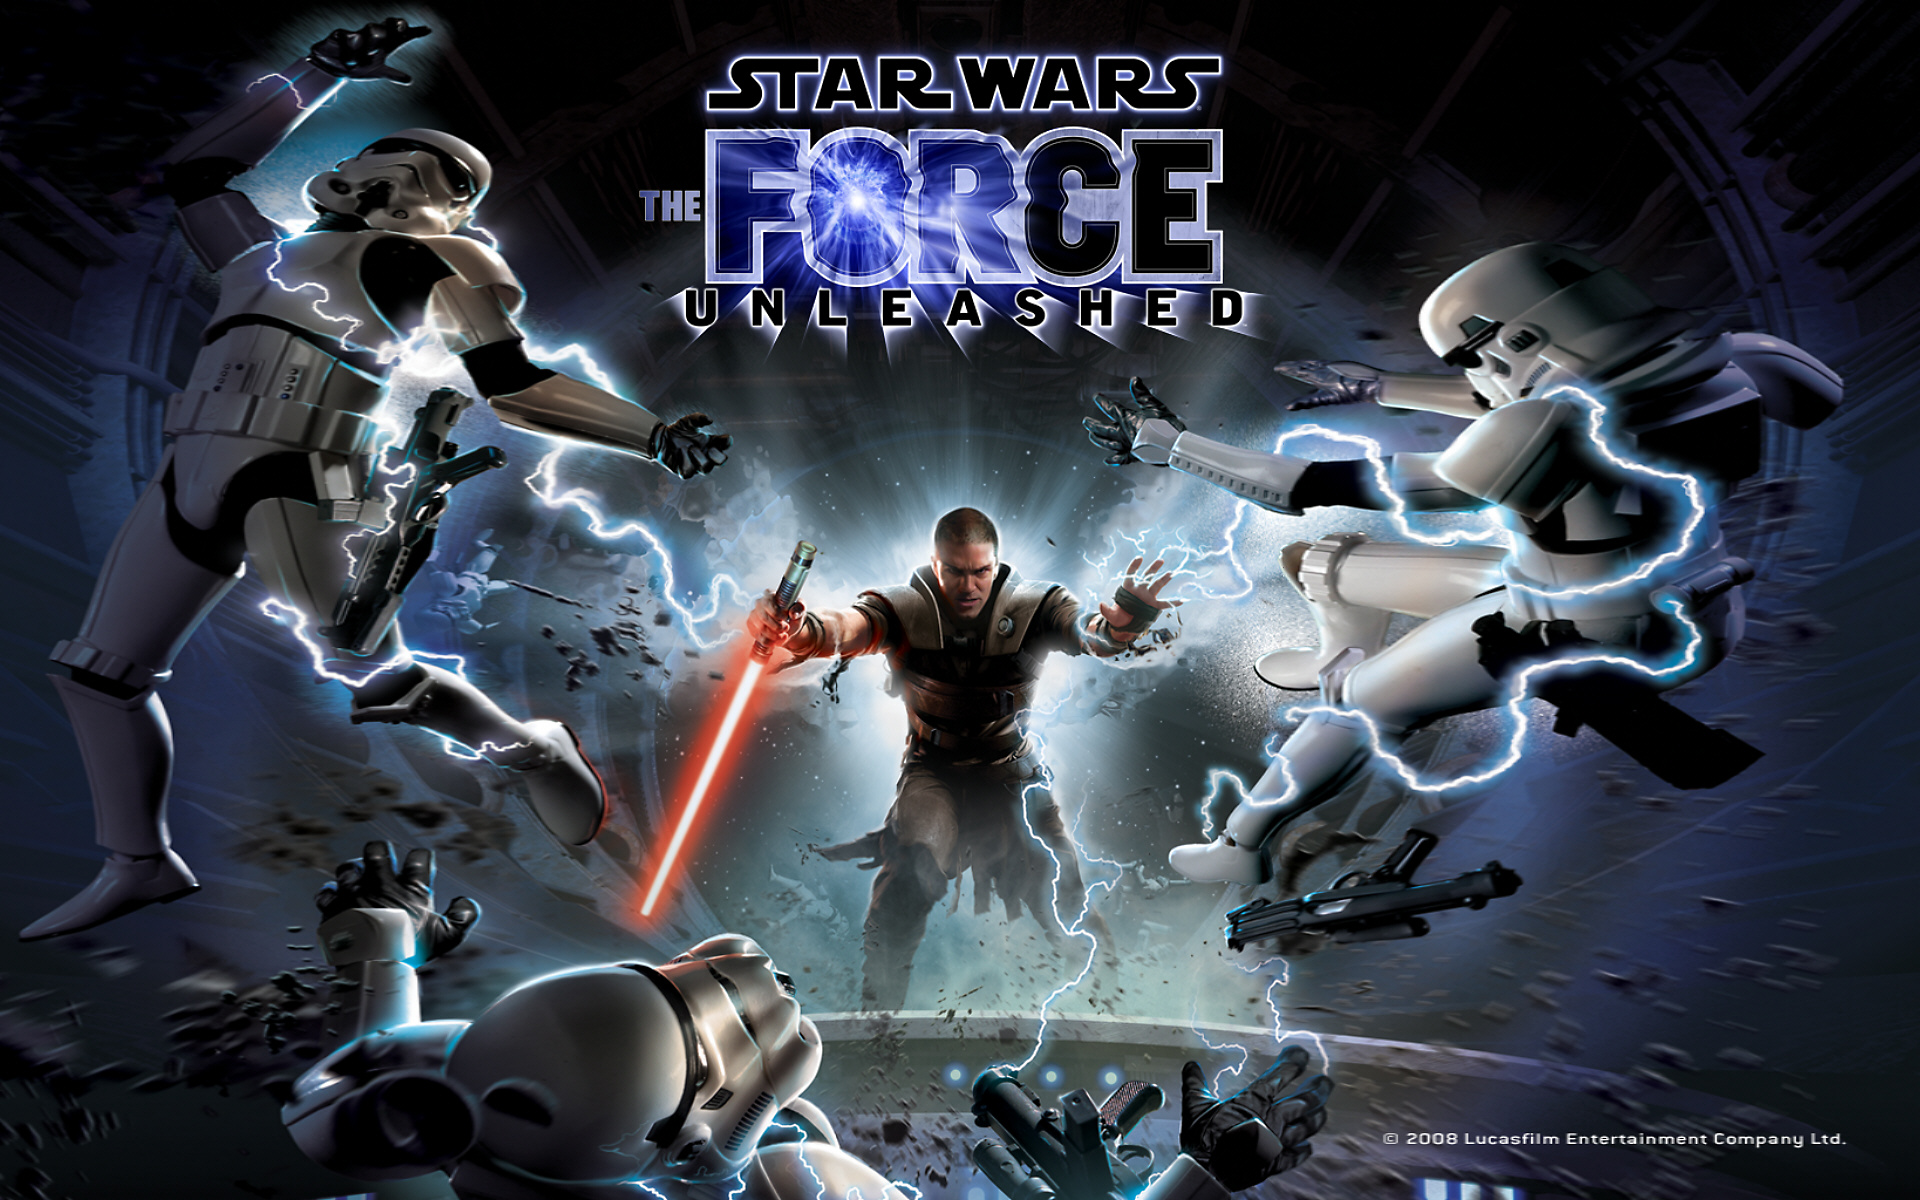 cool star wars wallpapers,action adventure game,graphic design,album cover,movie,cg artwork